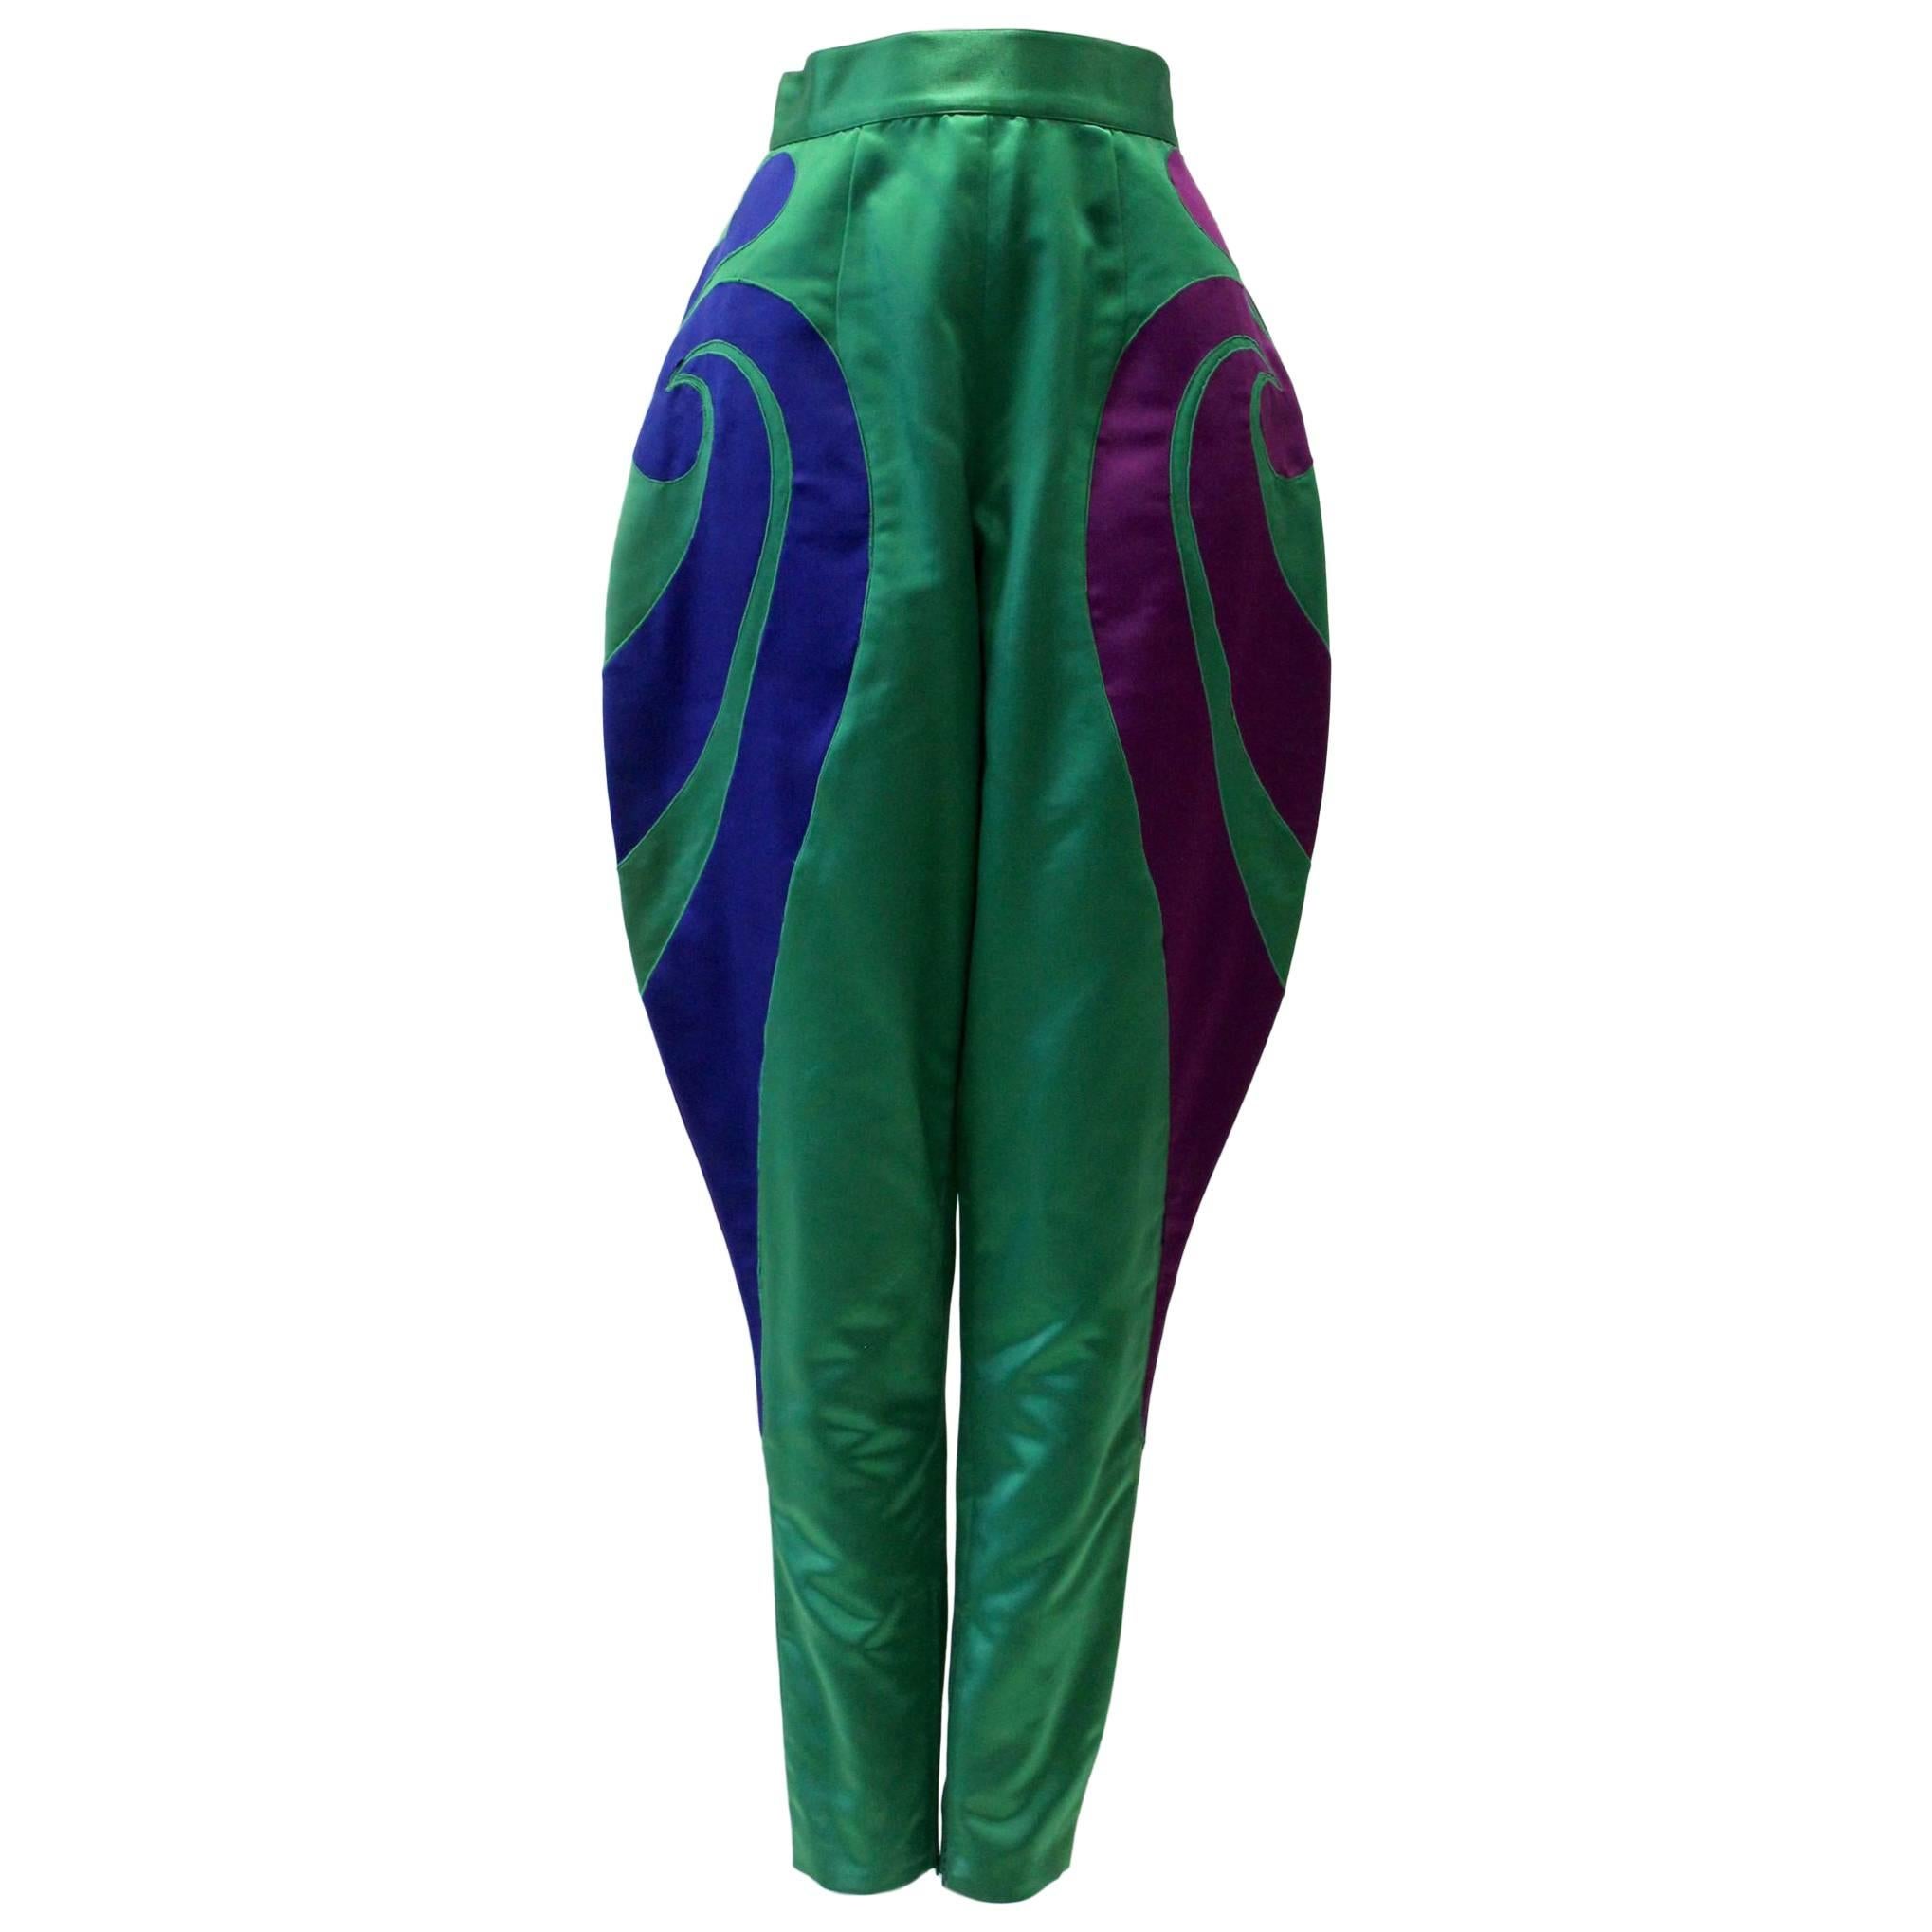 One Of A Kind Gianni Versace Silk Applique Jodhpurs Spring 1990 For Sale